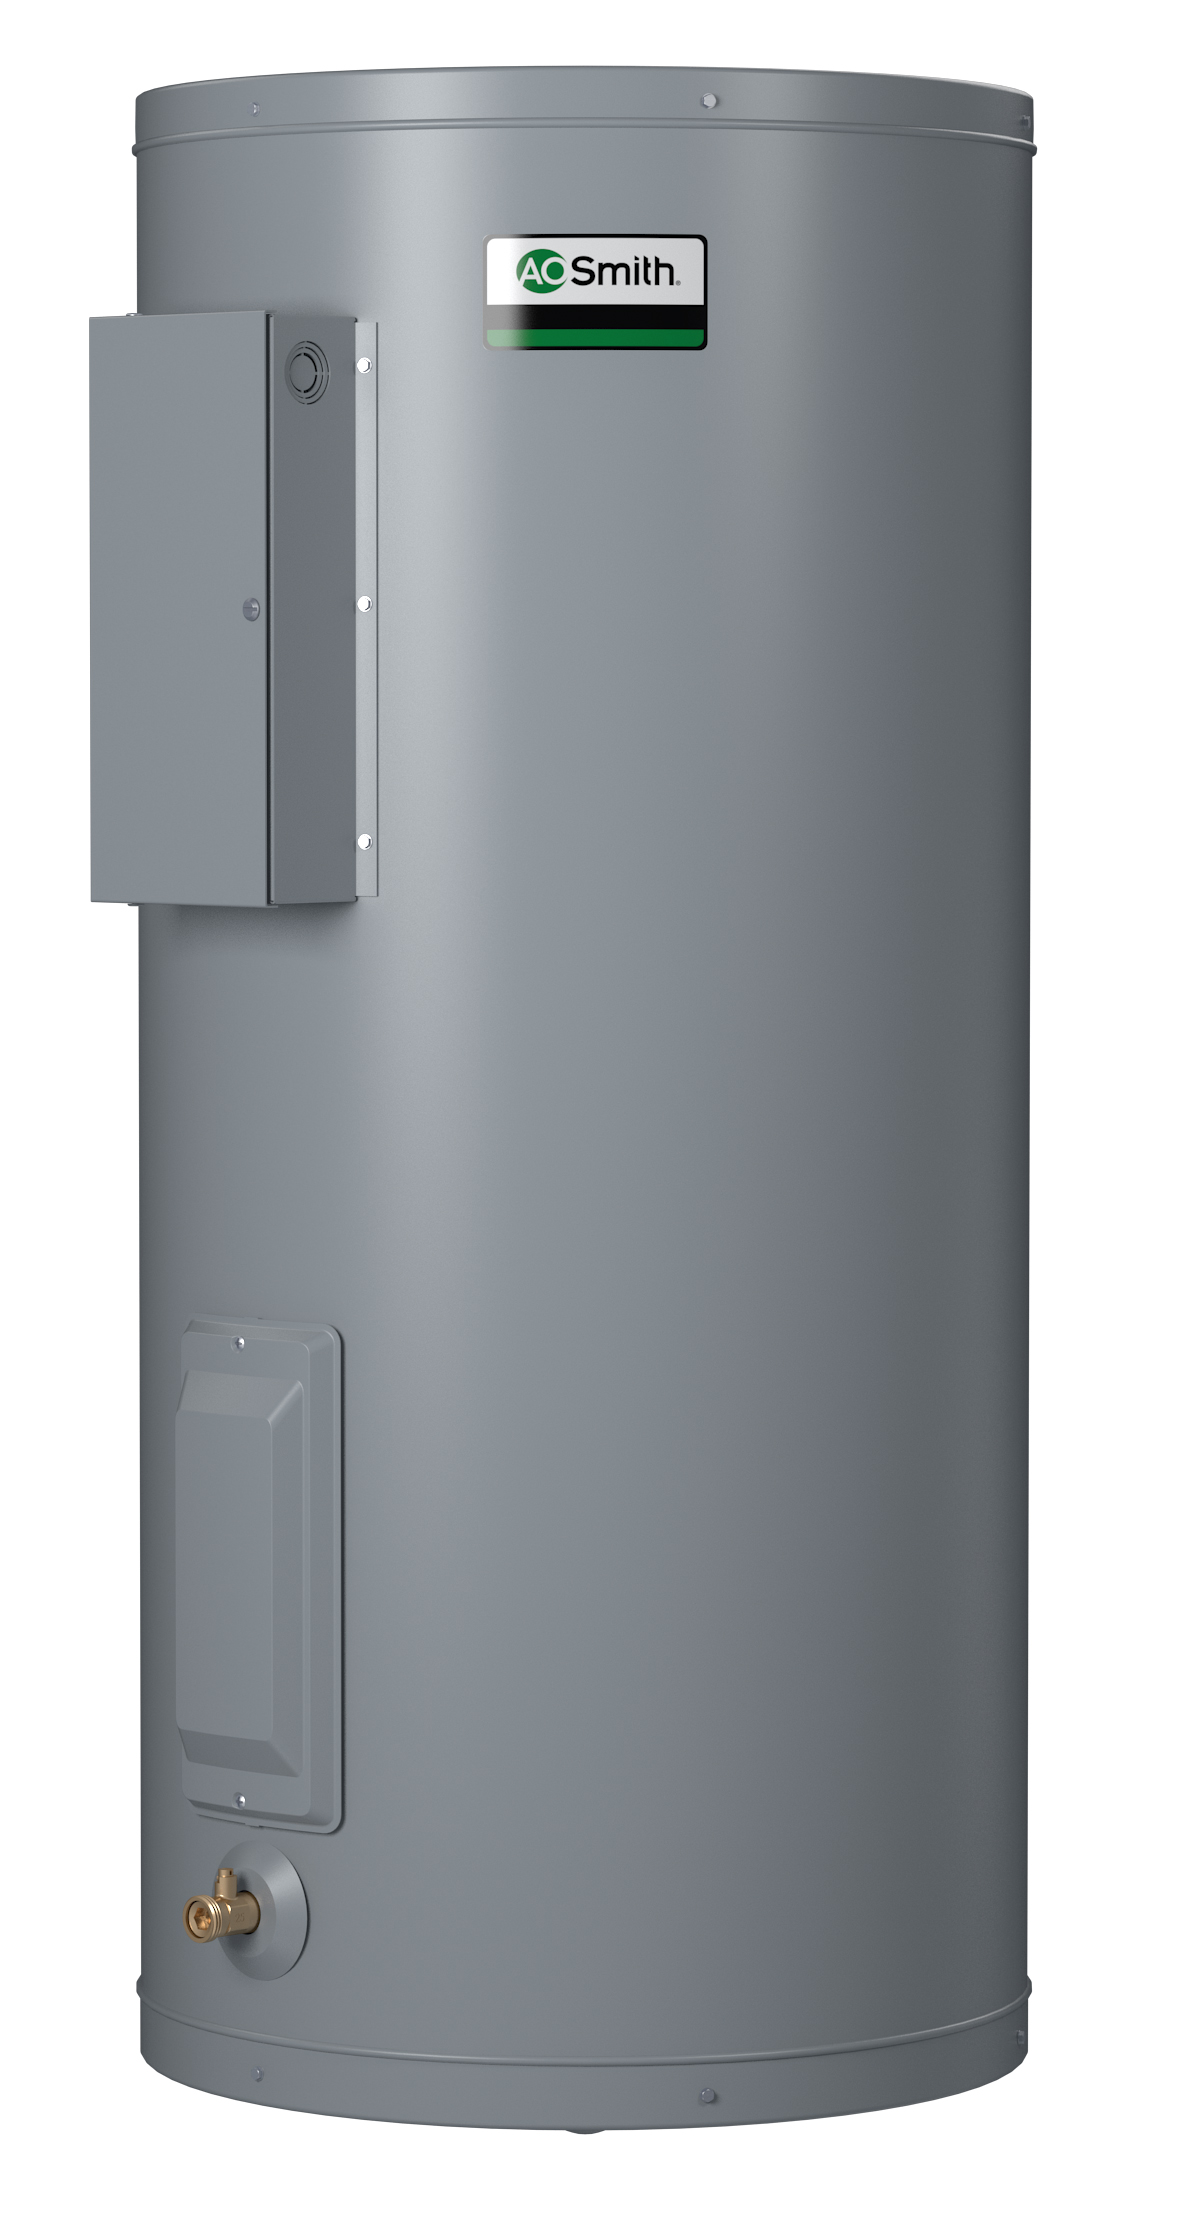 AO SMITH DEN-120D: 120 GALLONS, 10.0KW, 480 VOLT, 3 PHASE, (2-5000 WATT ELEMENTS, SIMULTANEOUS WIRING), DURA-POWER, LIGHT DUTY COMMERCIAL ELECTRIC WATER HEATER